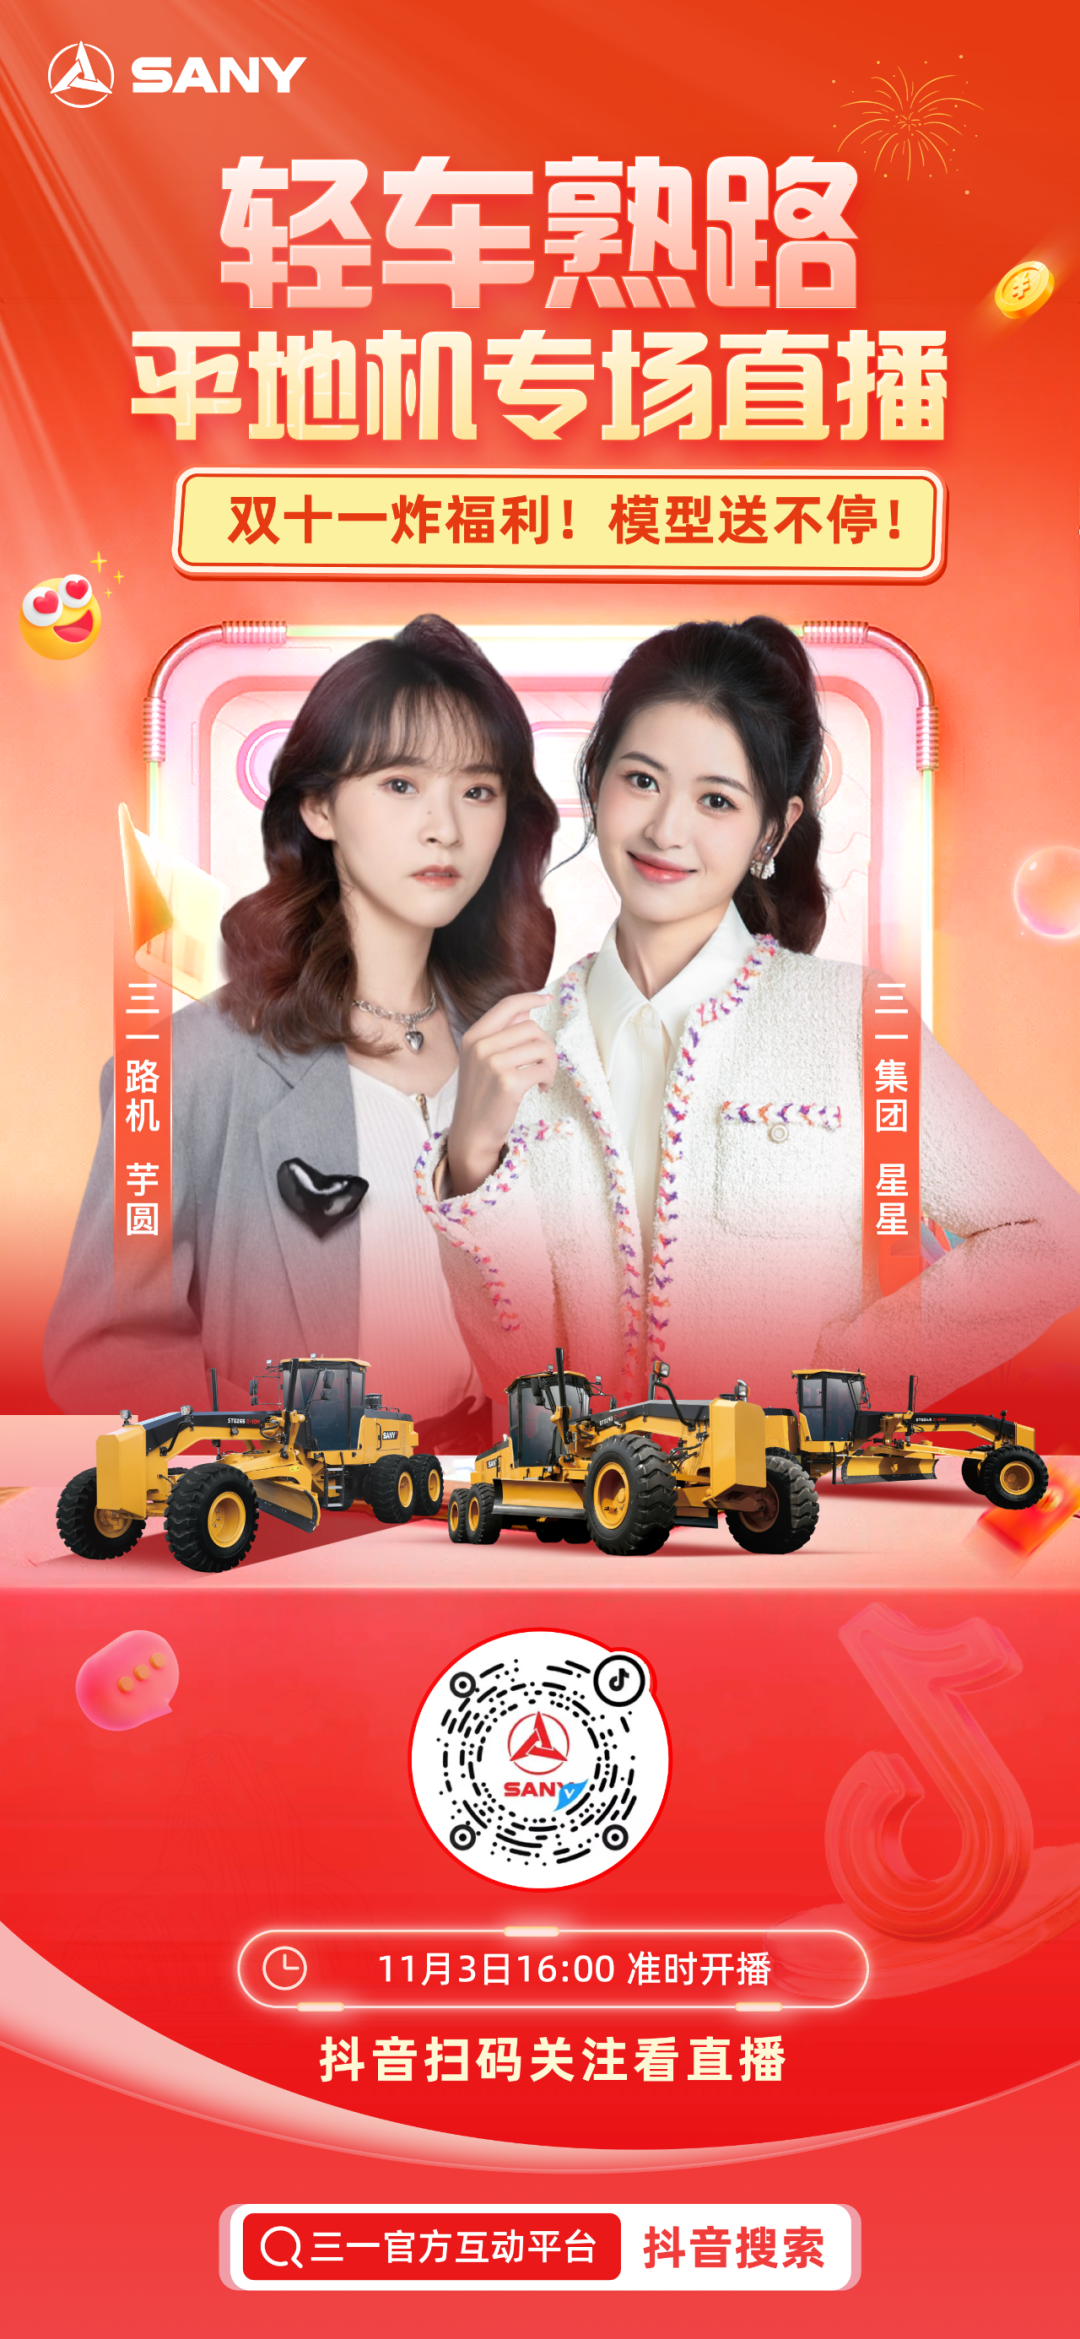 On November 3 (today) at 16:00, the special live broadcast of Sany Motor Grader!